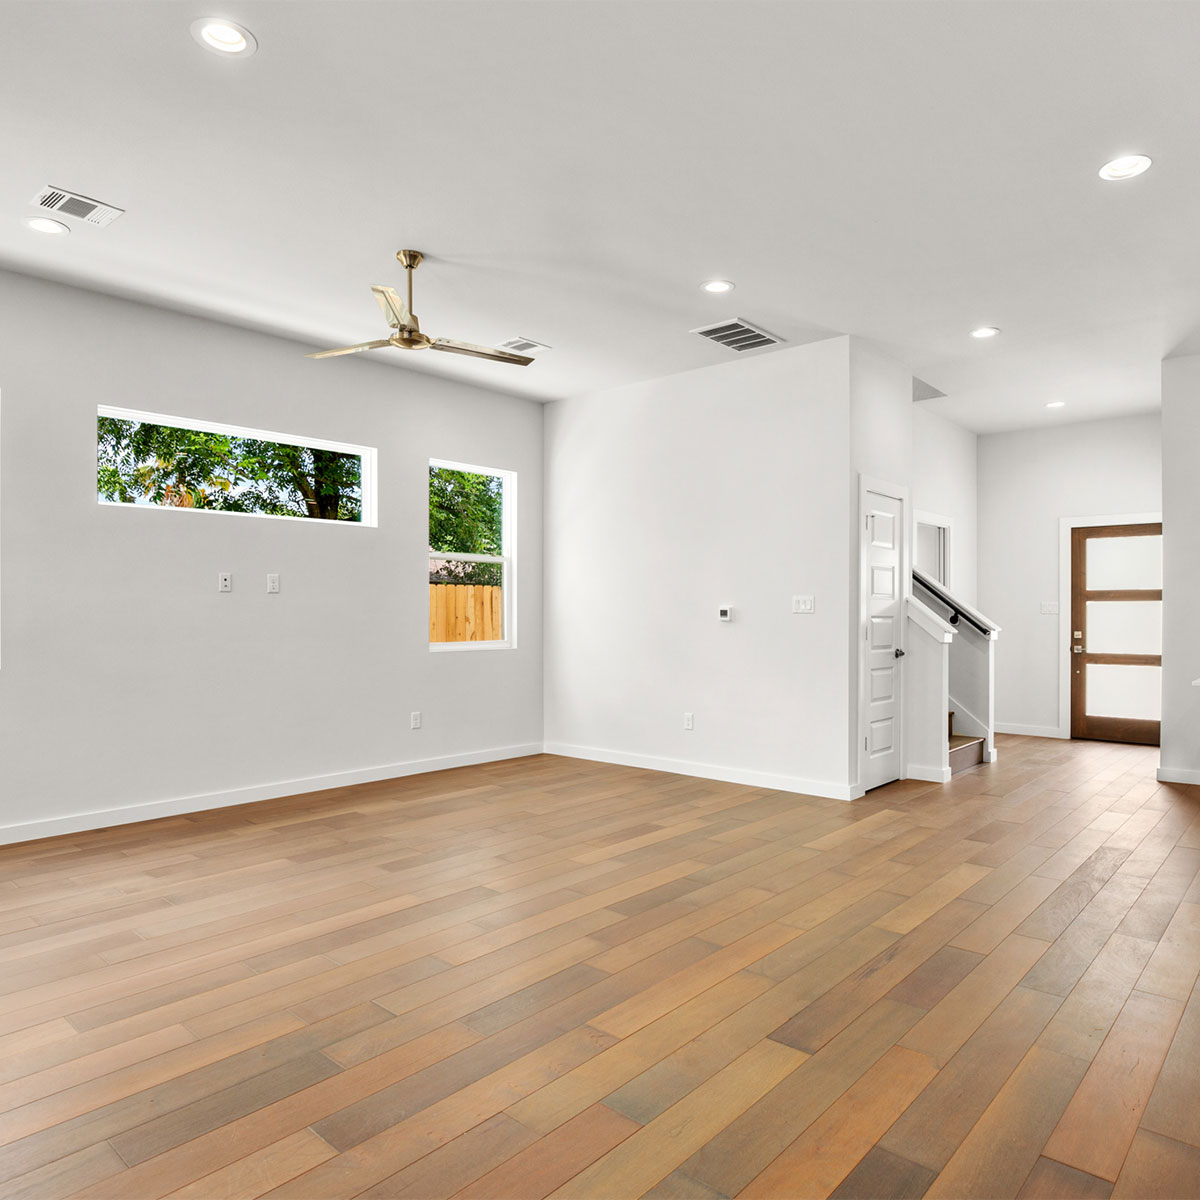 Wood and Tile flooring